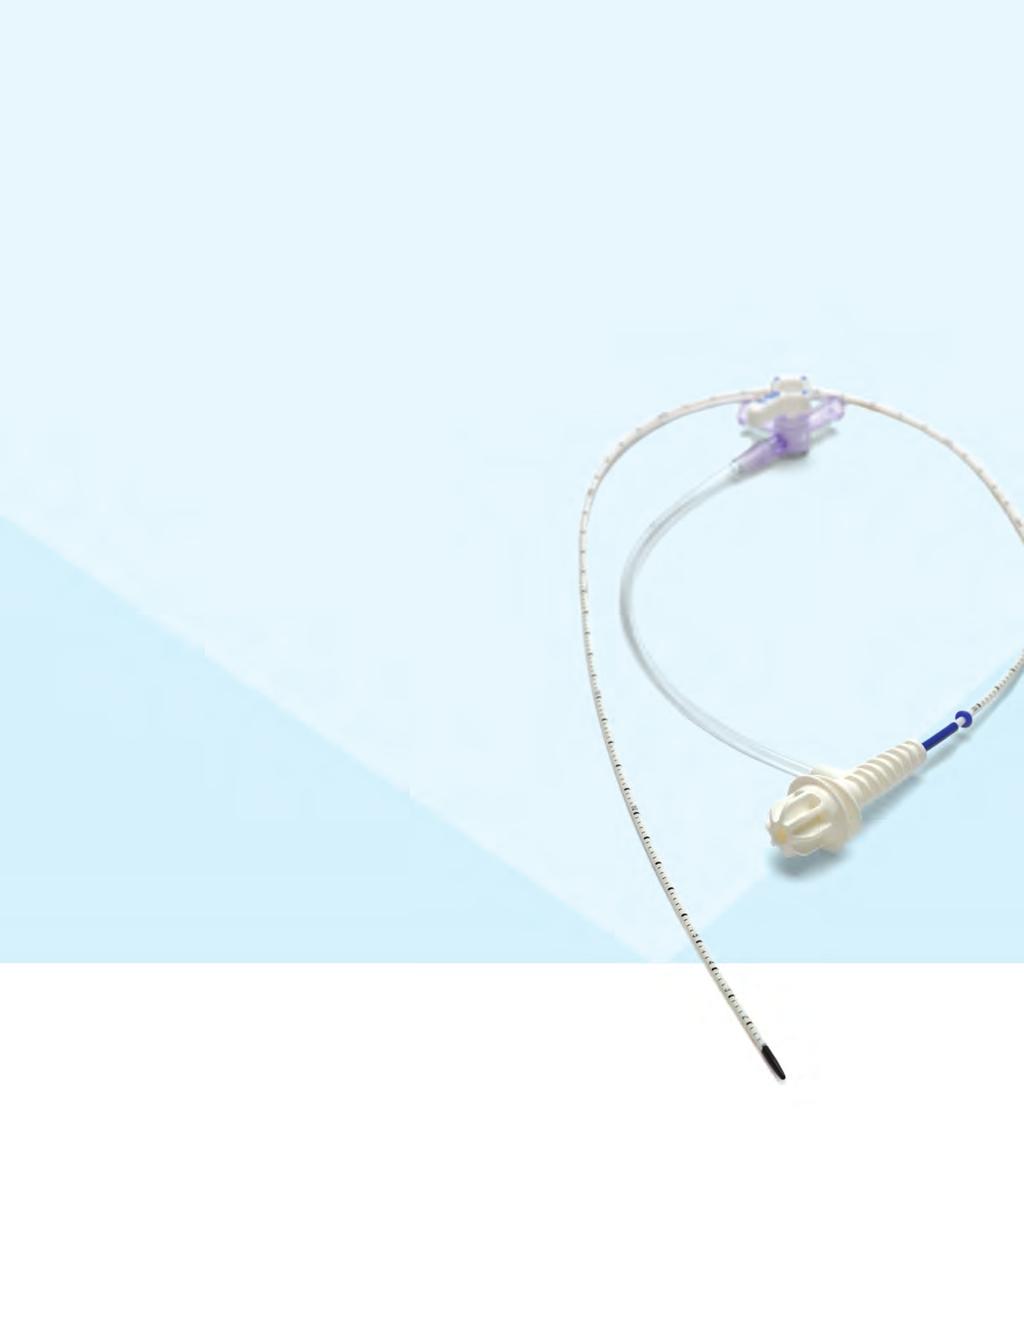 Spotlight One-Piece Sheath Procedure Kit Easier, Faster and Smaller Than Other Bare-Tip Fibers The Spotlight OPS procedure kit makes treating veins easier and faster than other bare-tip fiber kits.